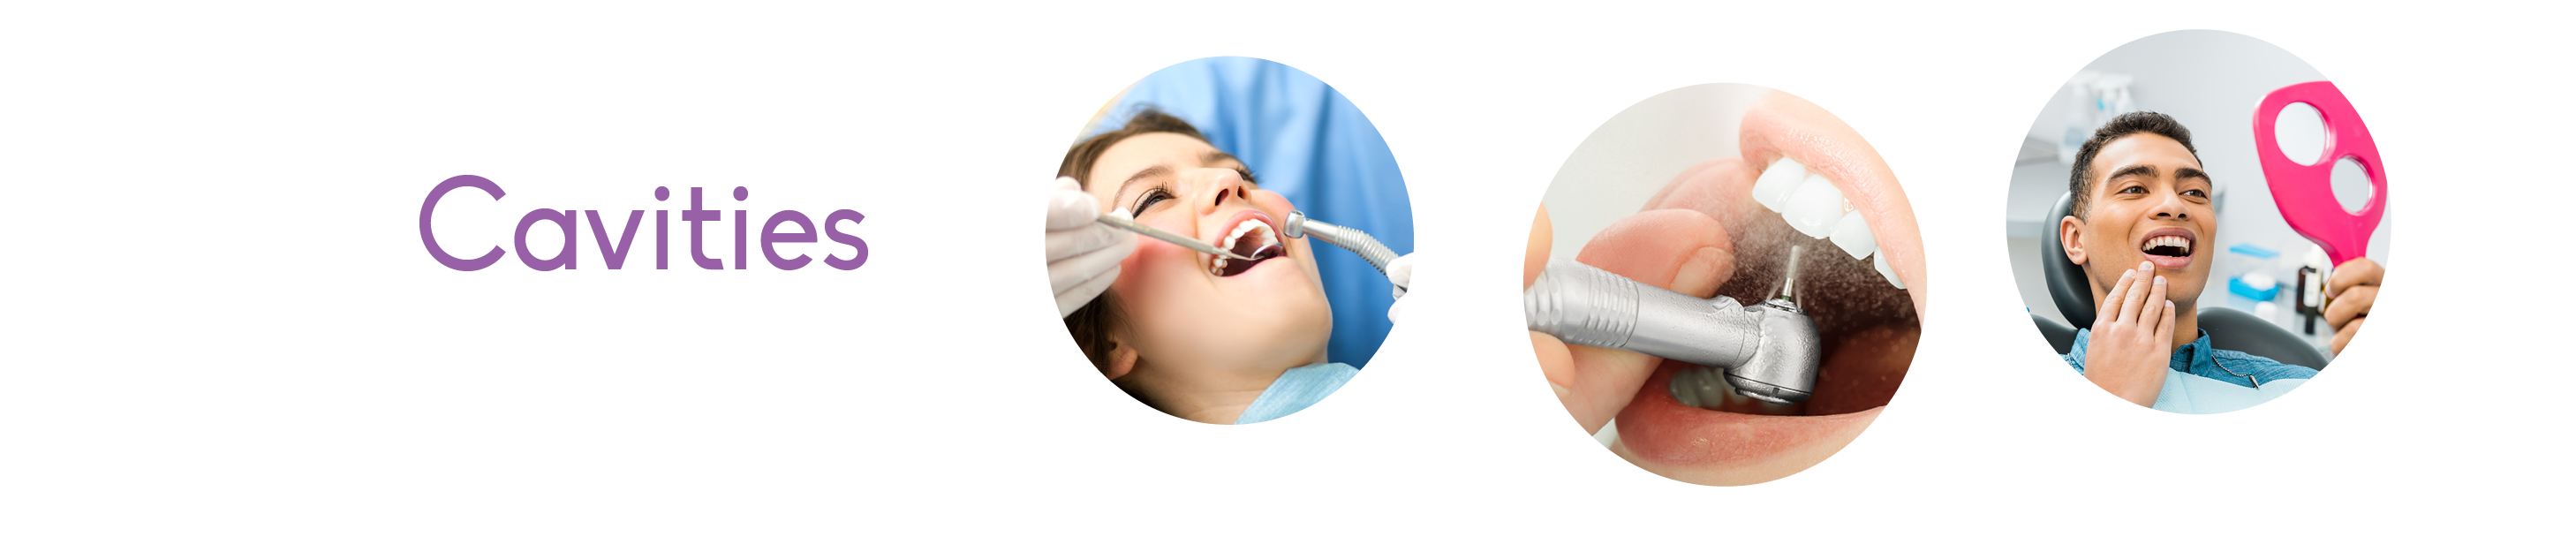 Local Dental Problems Blog, Dentist Treatment Solution Chats, Common Dental Questions and Posting Your Dental Problem Request